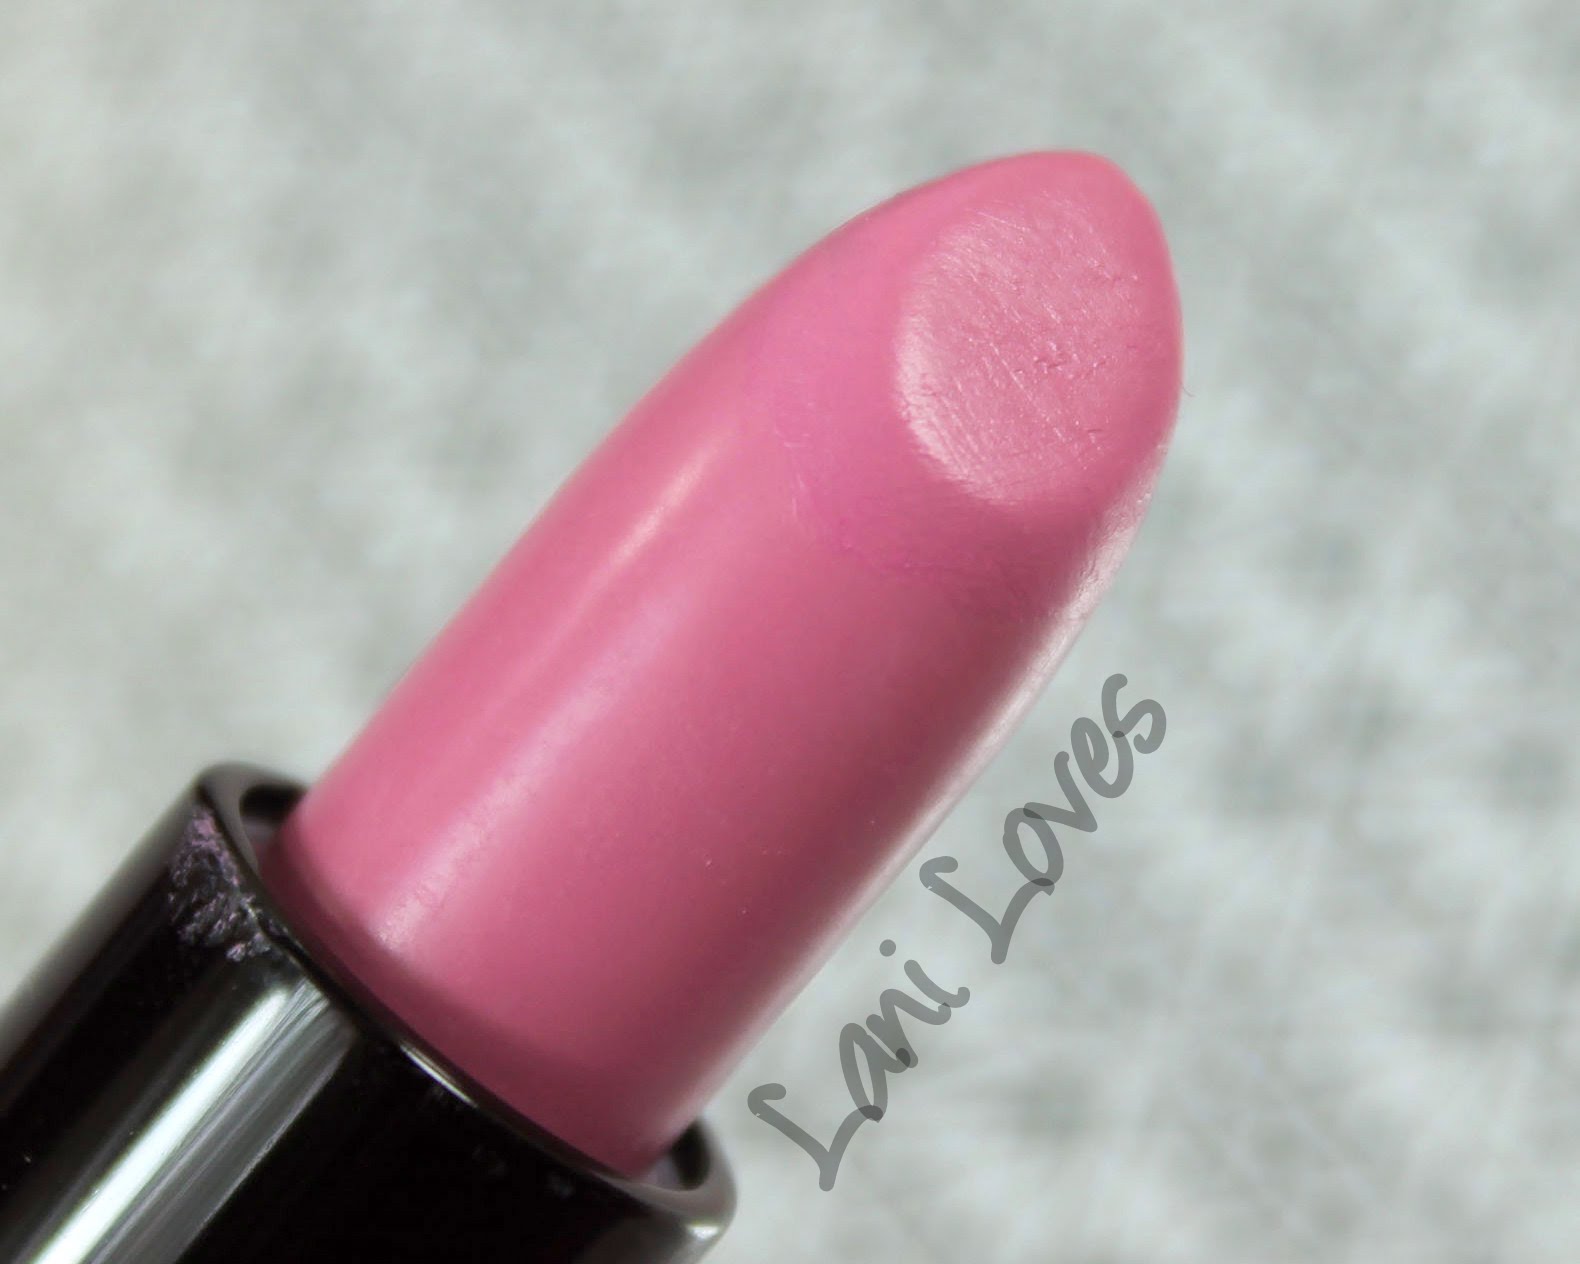 W7 Go West! Matte Lipstick - Pink Candy Swatches & Review